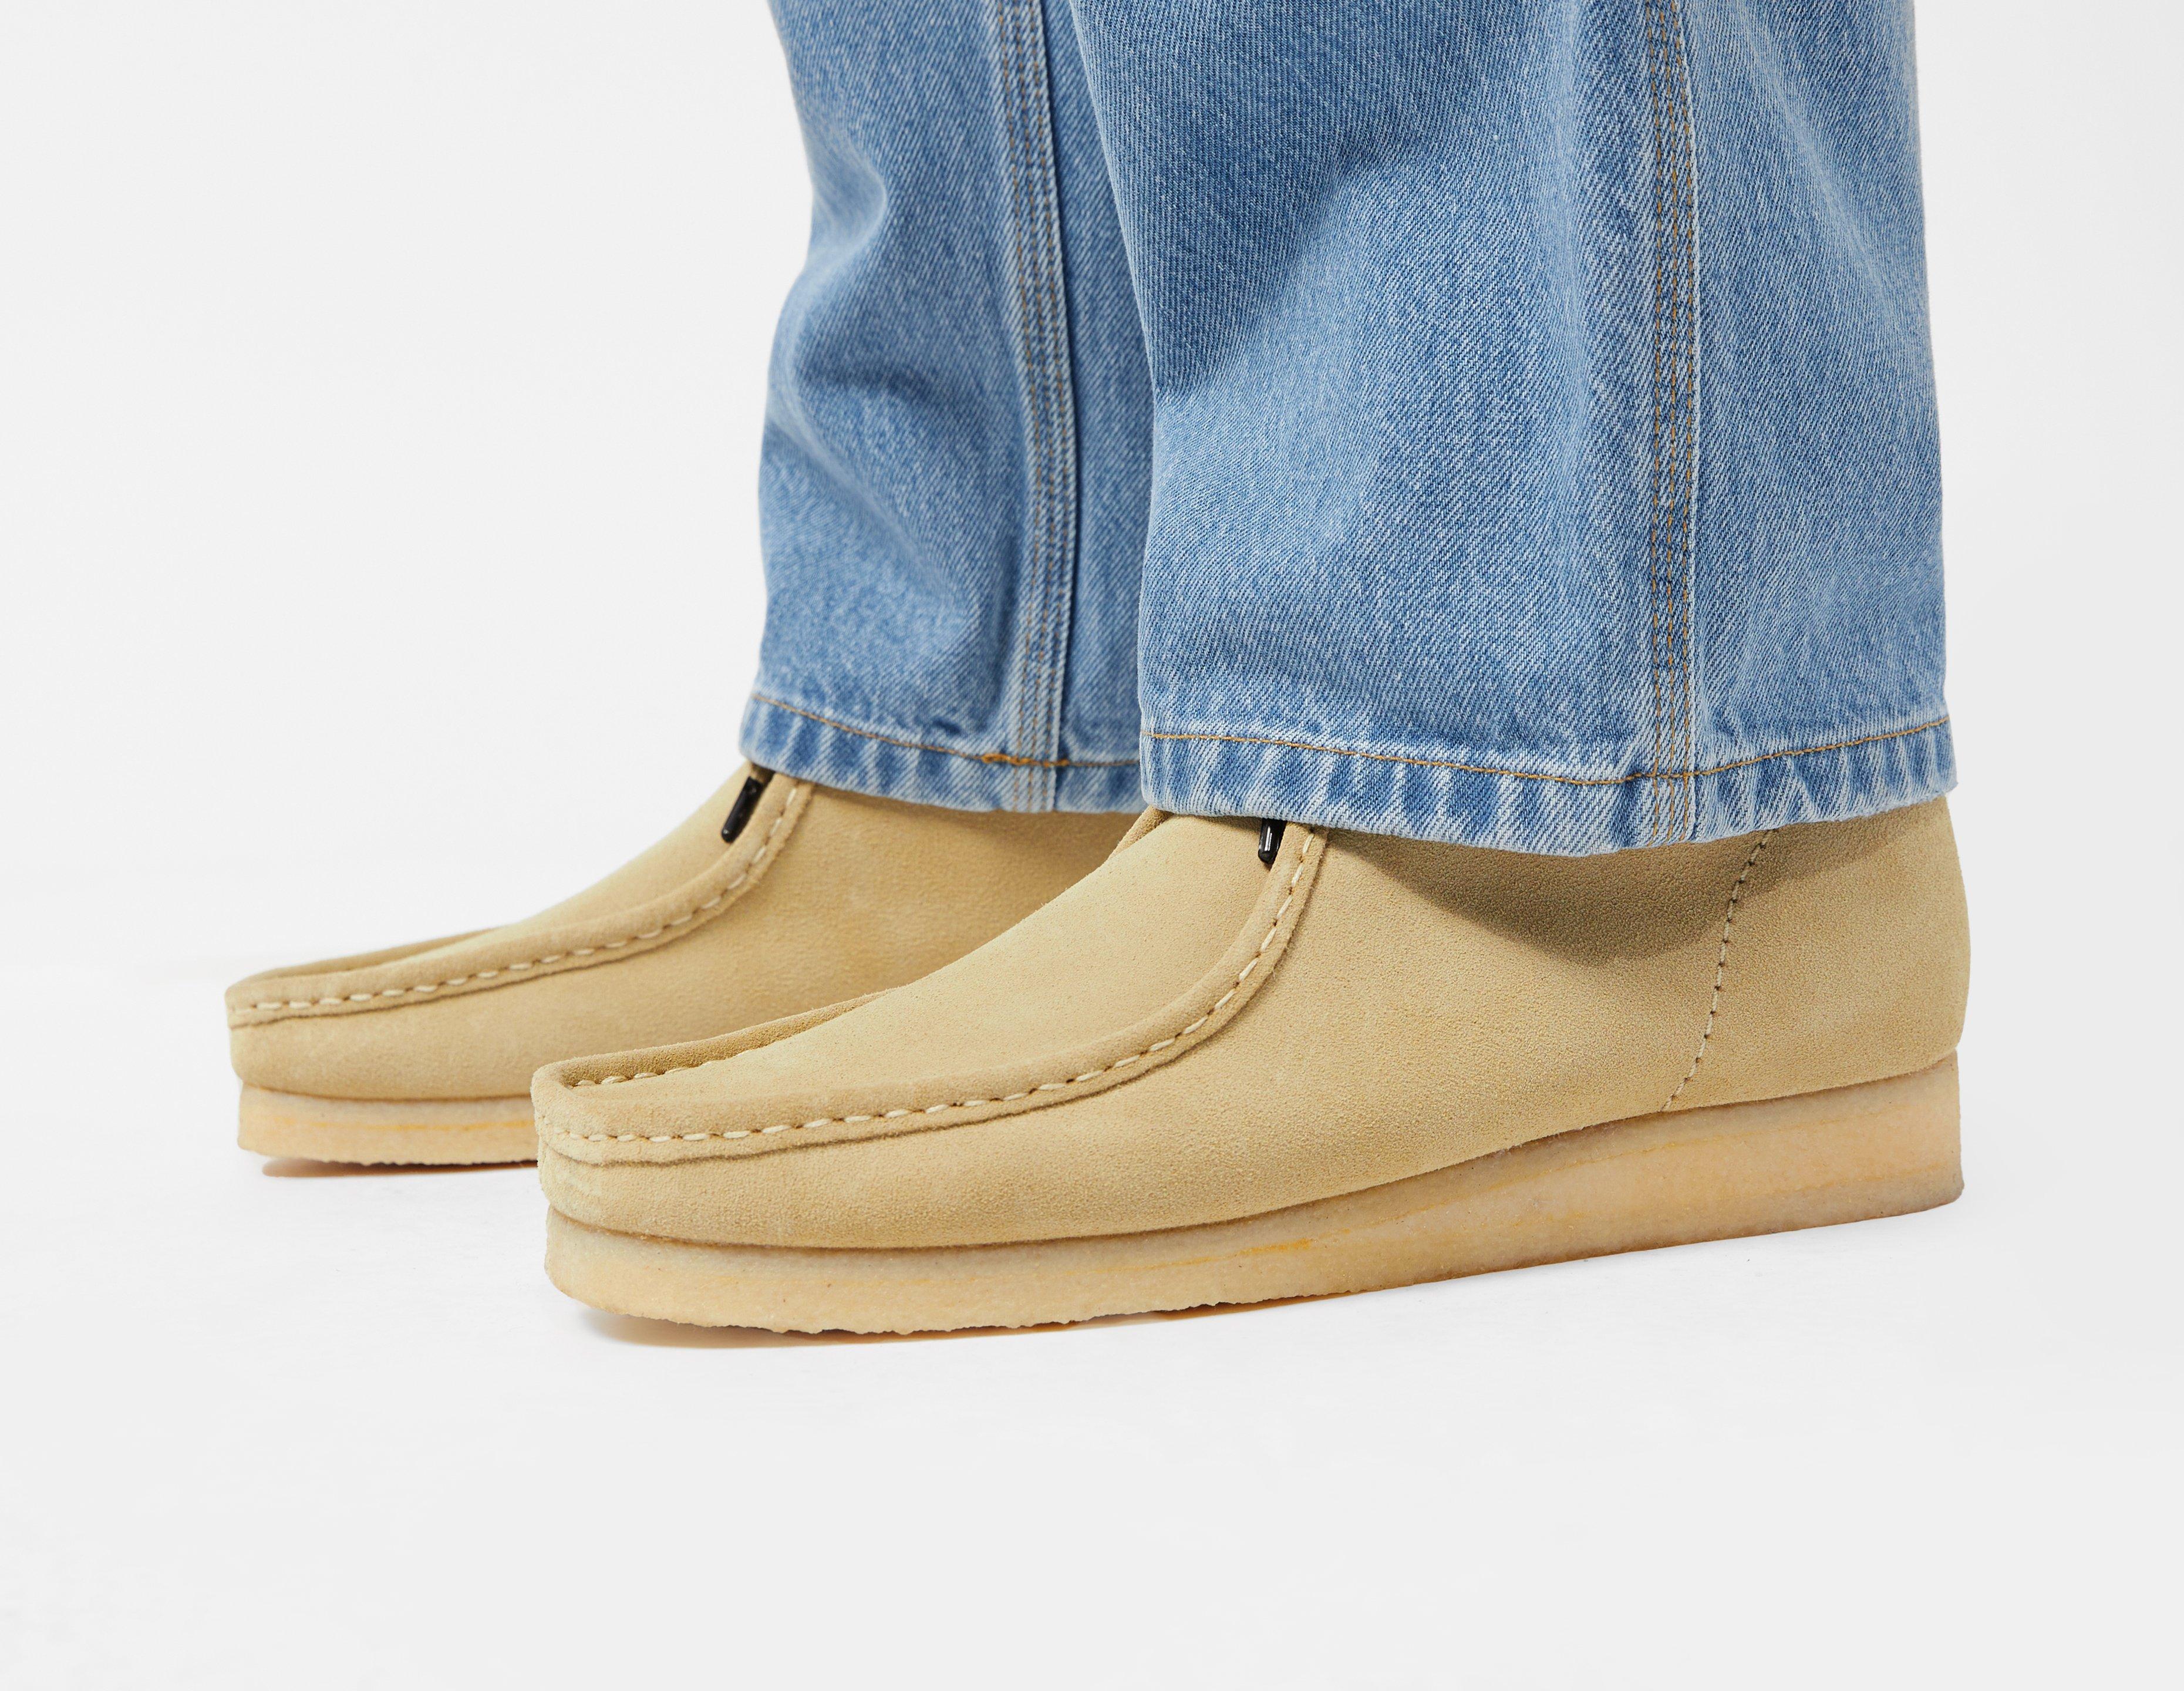 clarks wallabee boots